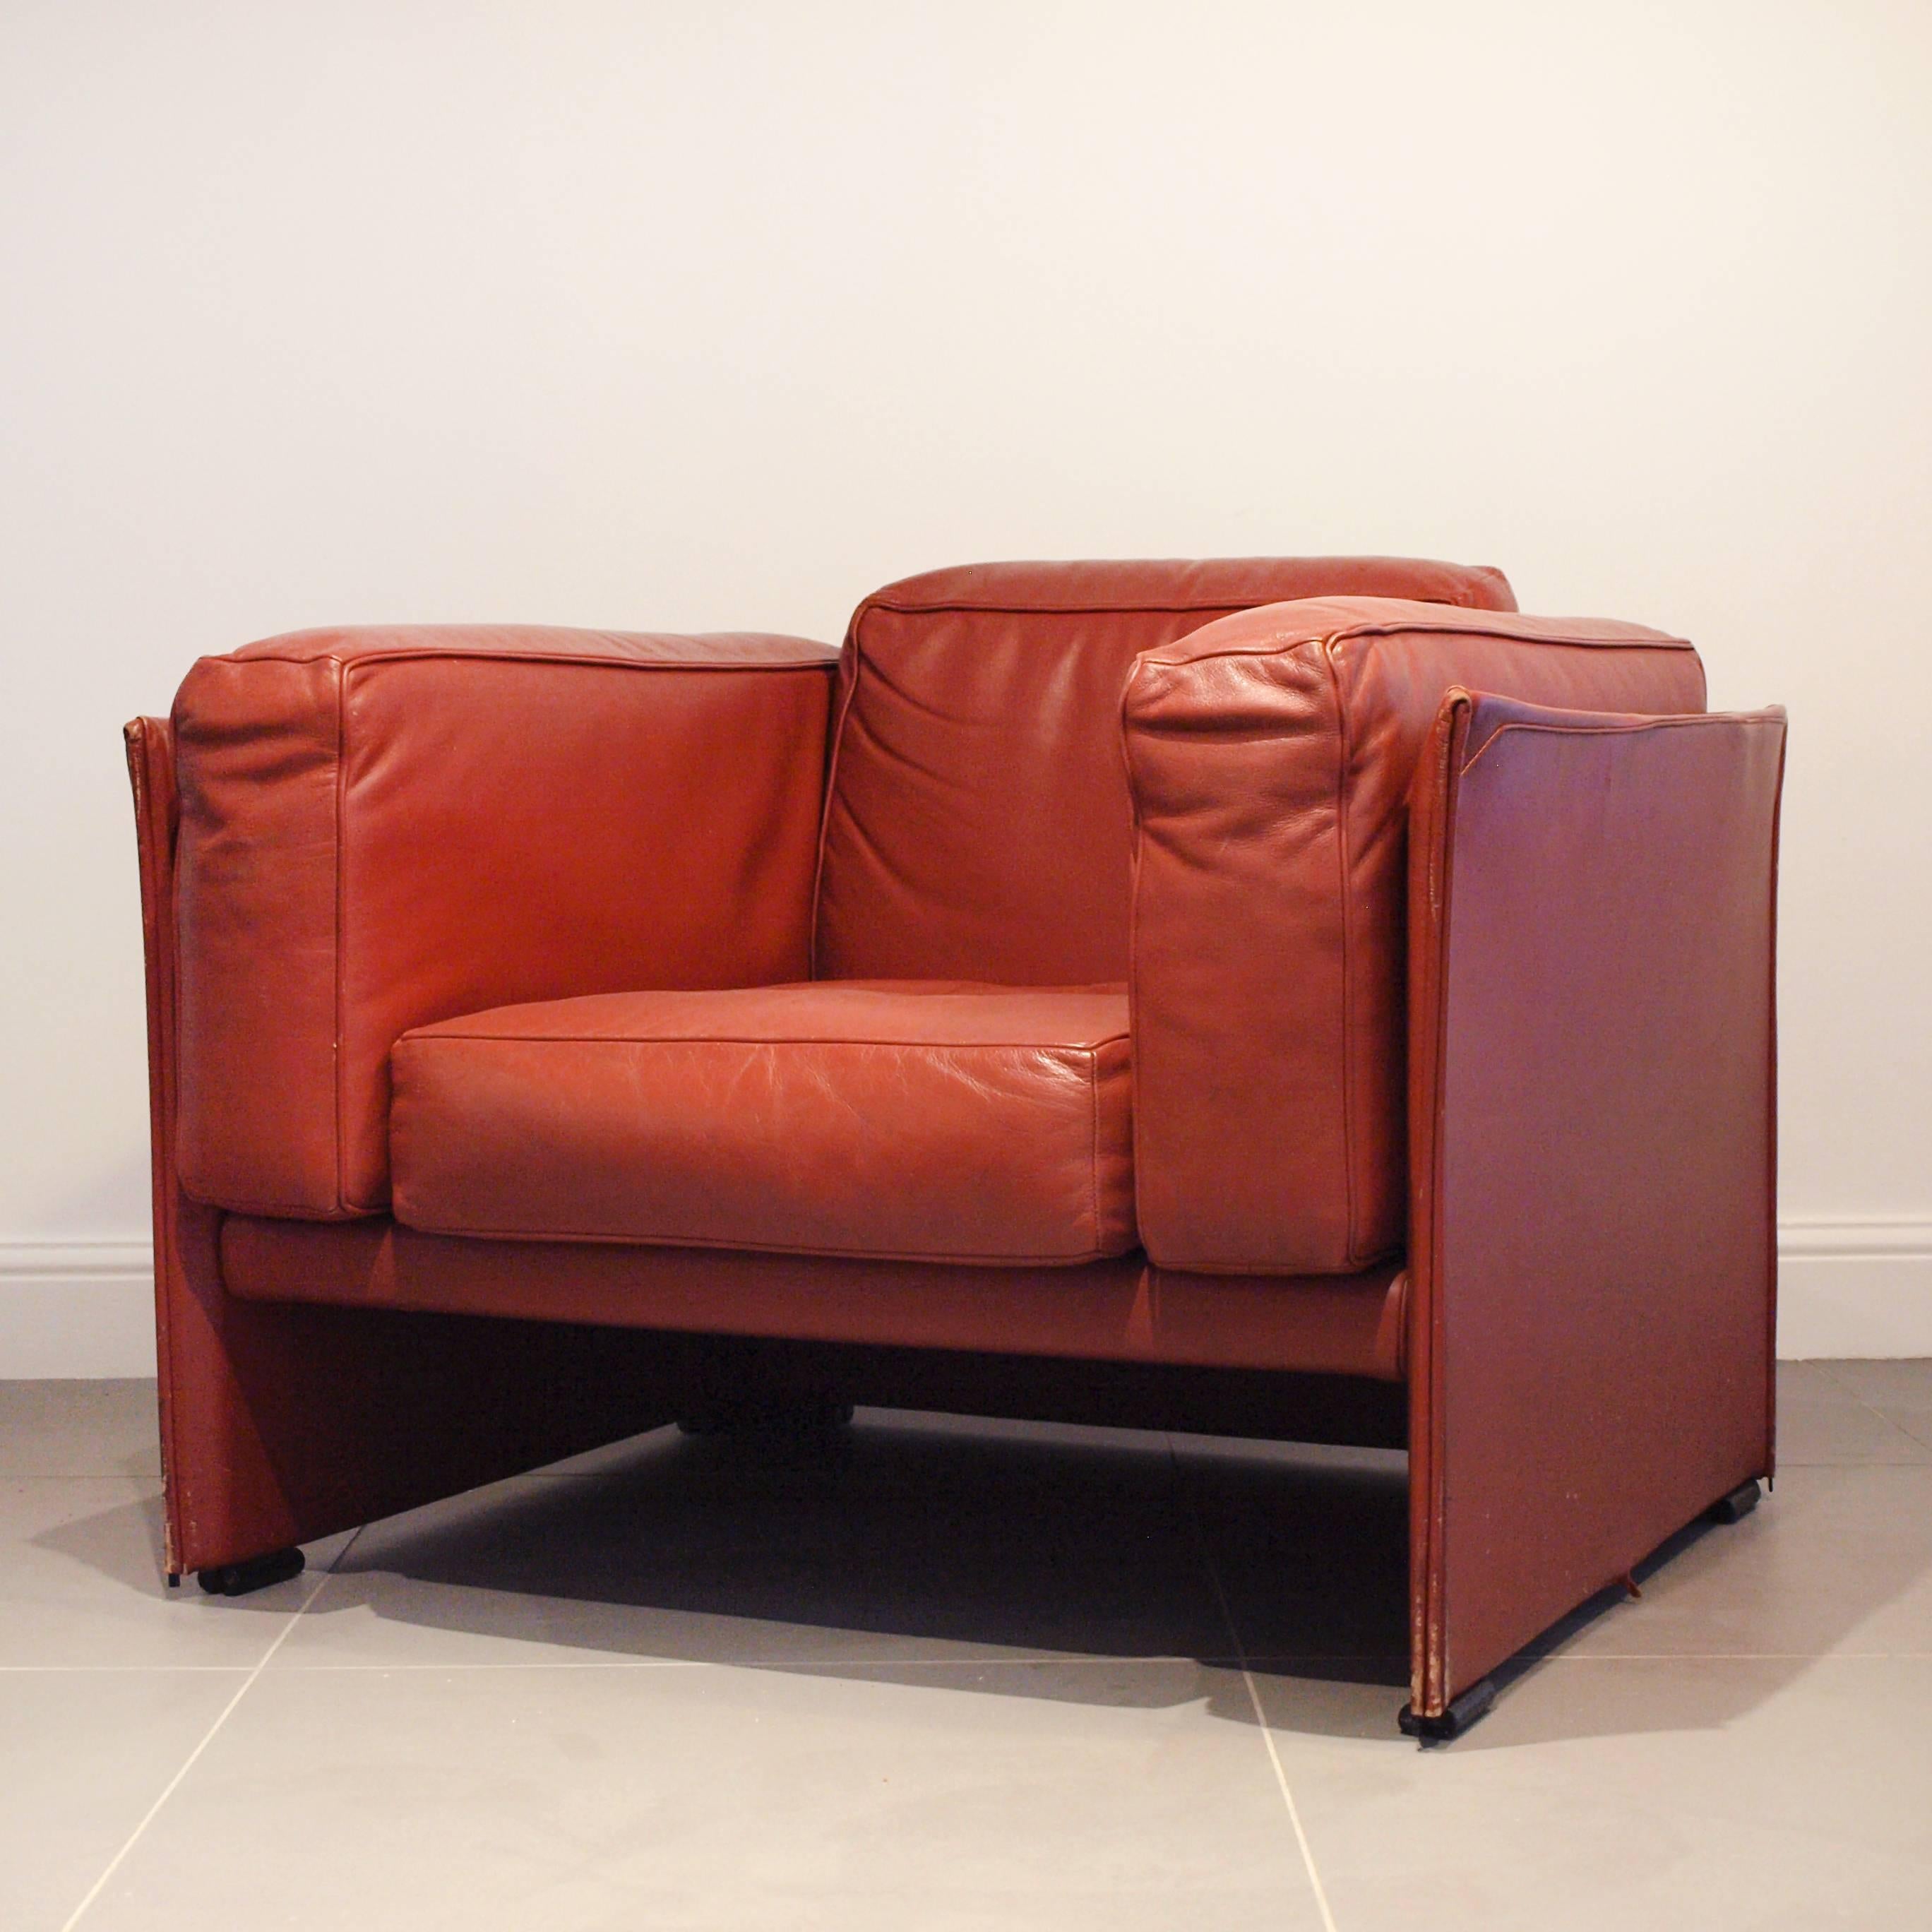 A red leather Cassina 405 Duc armchair on chrome feet, designed by Mario Bellini. At the heart of the chair are four large red leather square cushions, these are encased in a cube-like outer body, with a slightly scalloped edge towards the top